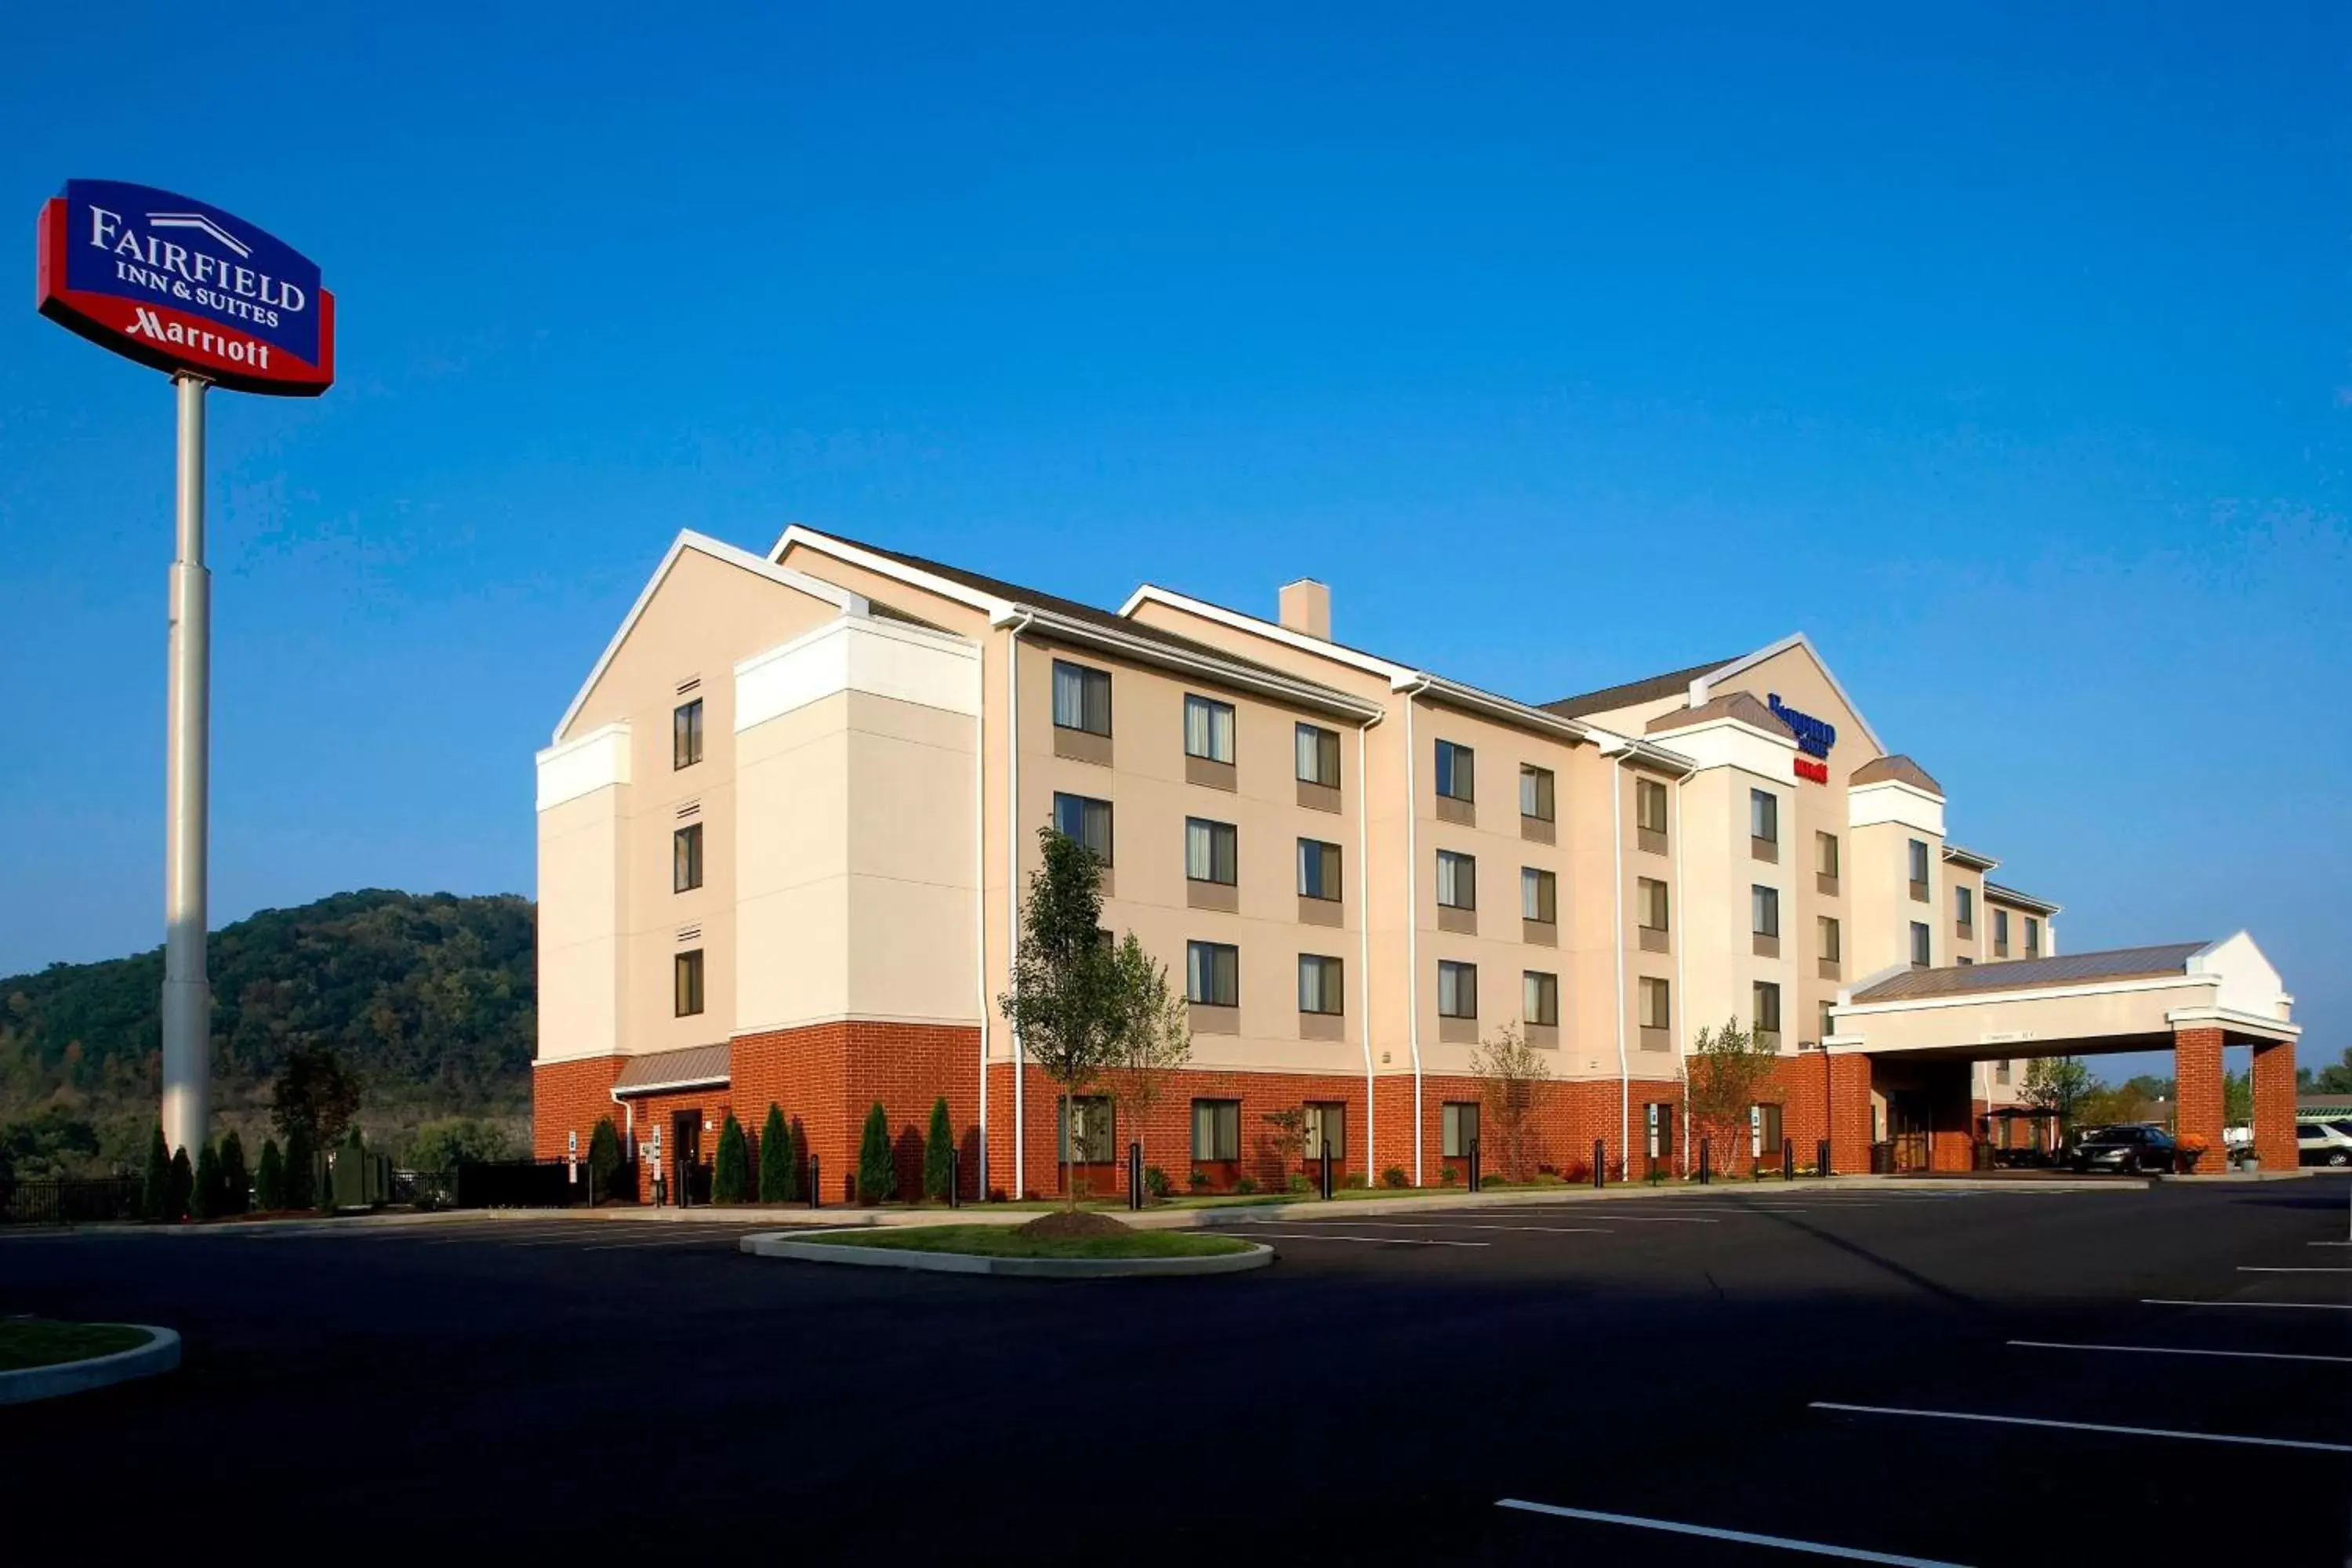 Property Building in Fairfield Inn & Suites Pittsburgh Neville Island